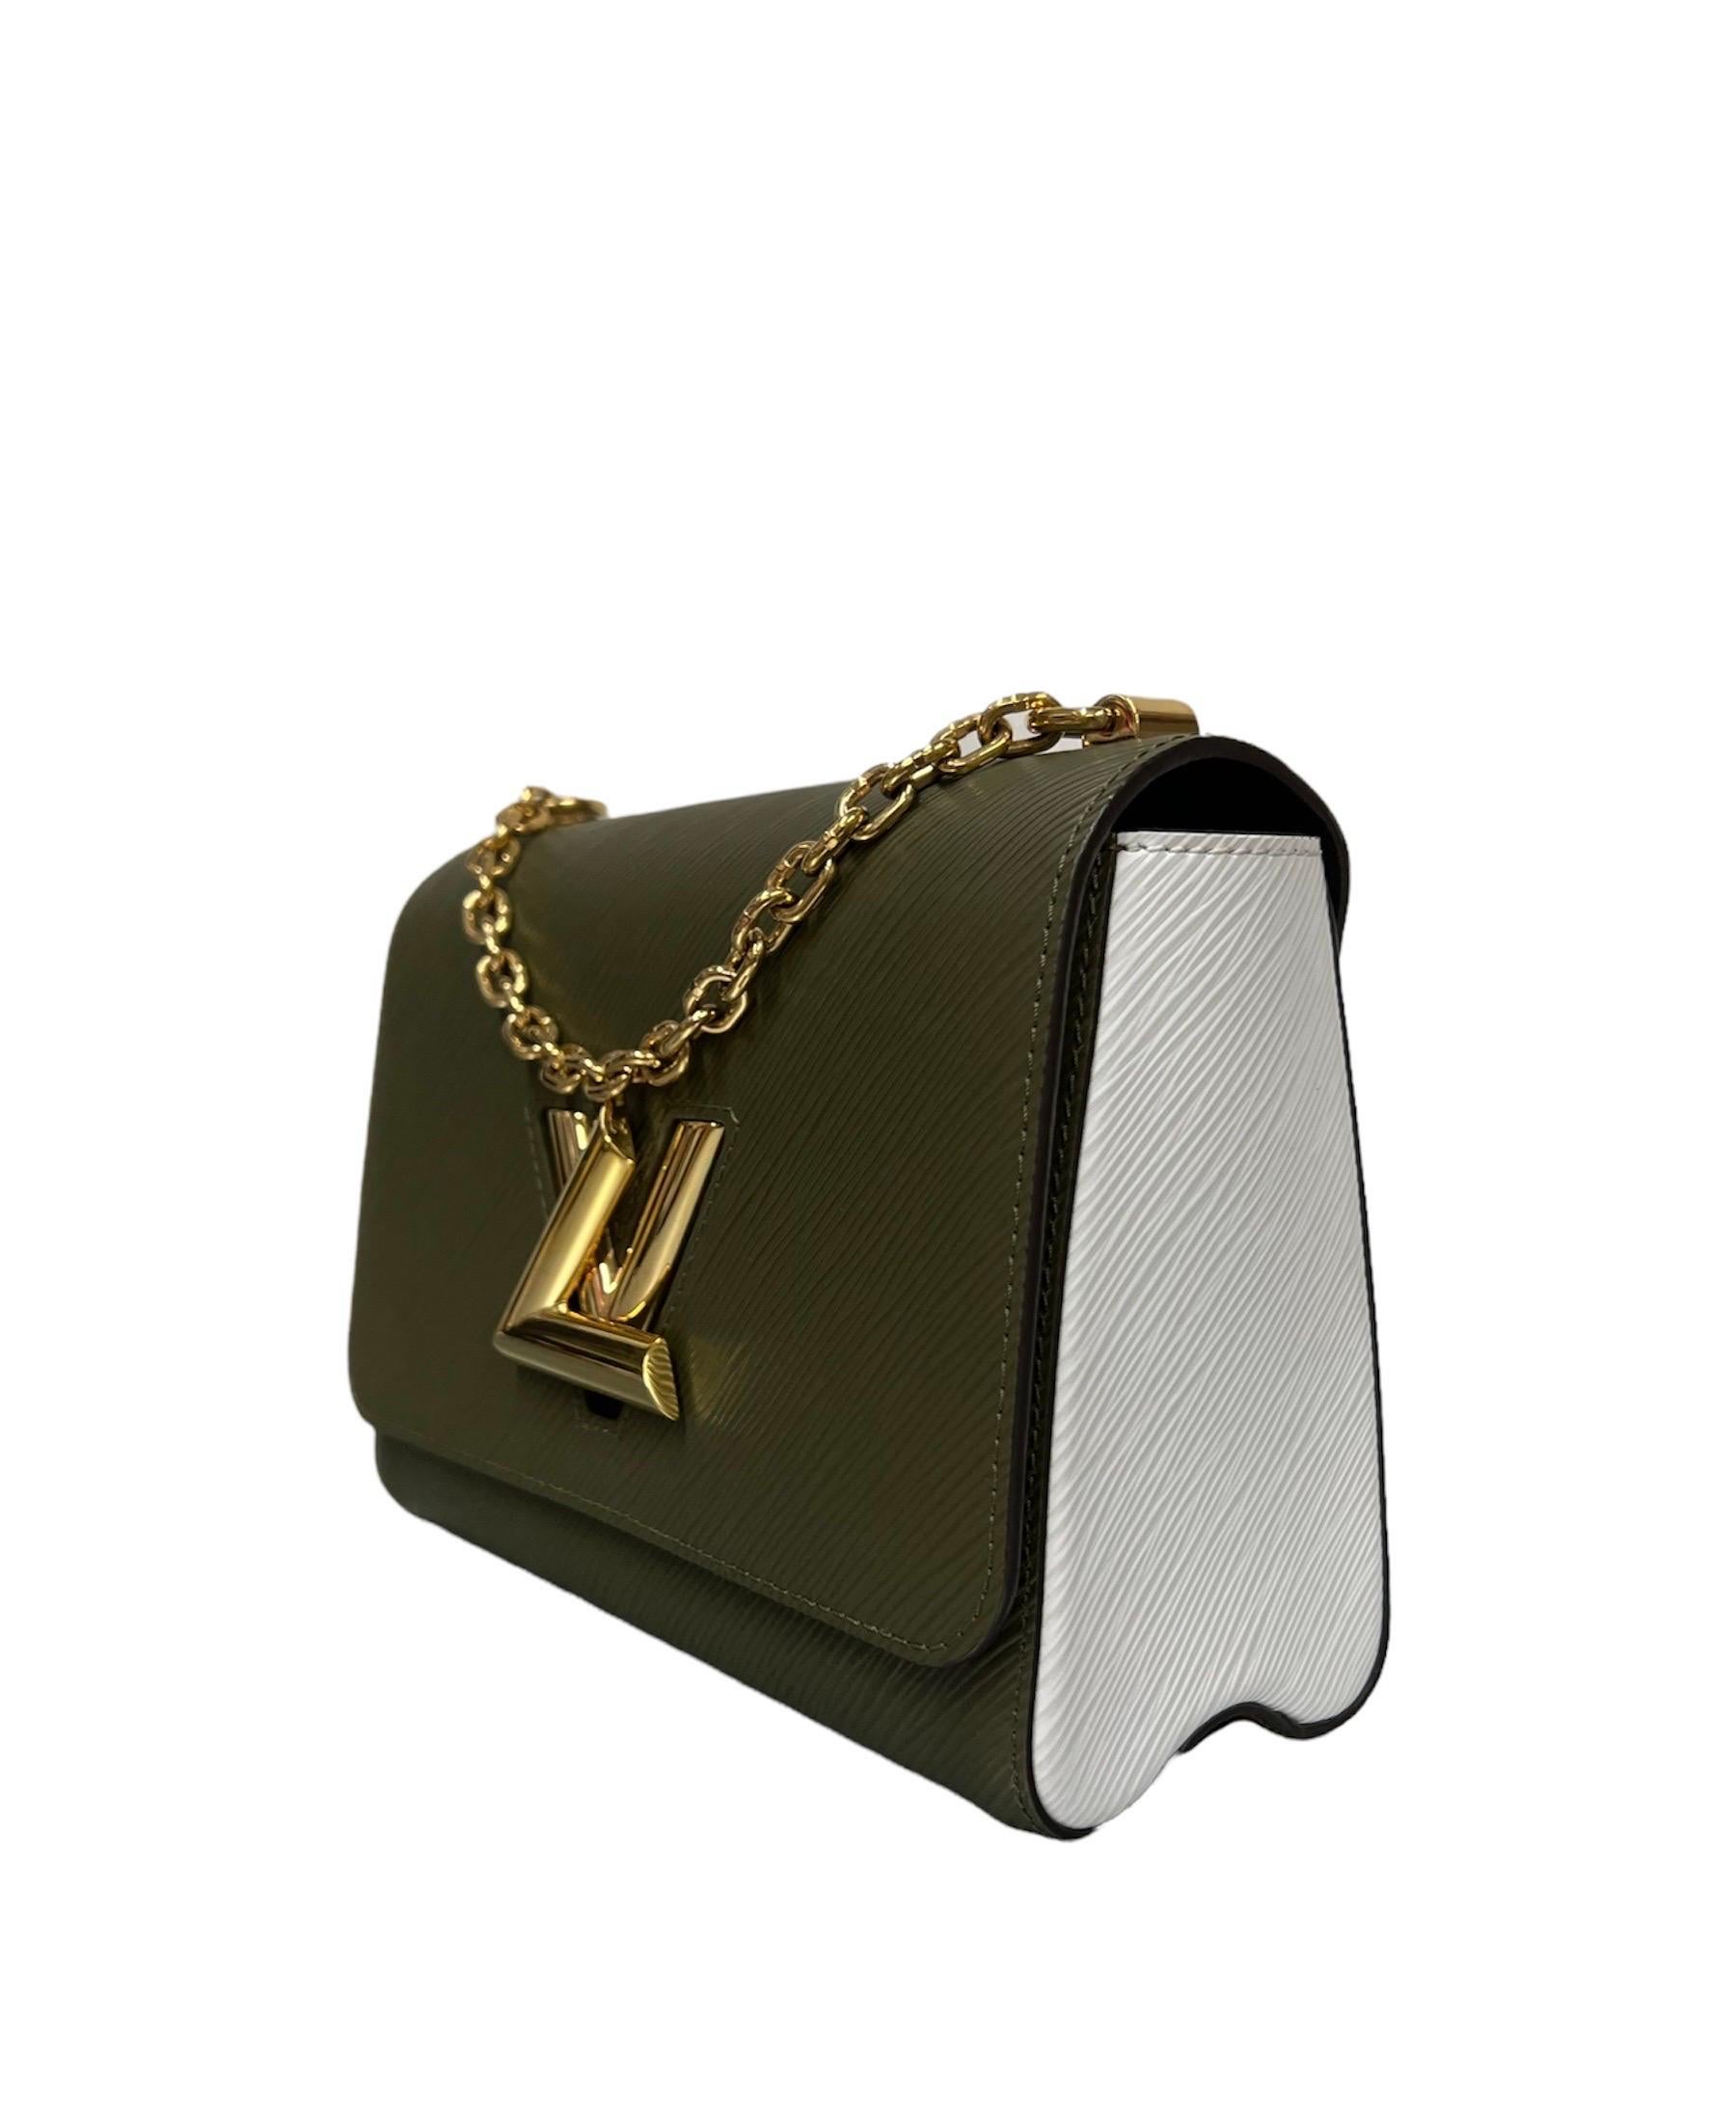 Louis Vuitton bag, Twist line, made of military green and white bicolor epi leather with golden hardware.

Equipped with a flap with LV logo closure, internally lined in black suede, quite roomy.

Equipped with a chain handle and a removable and